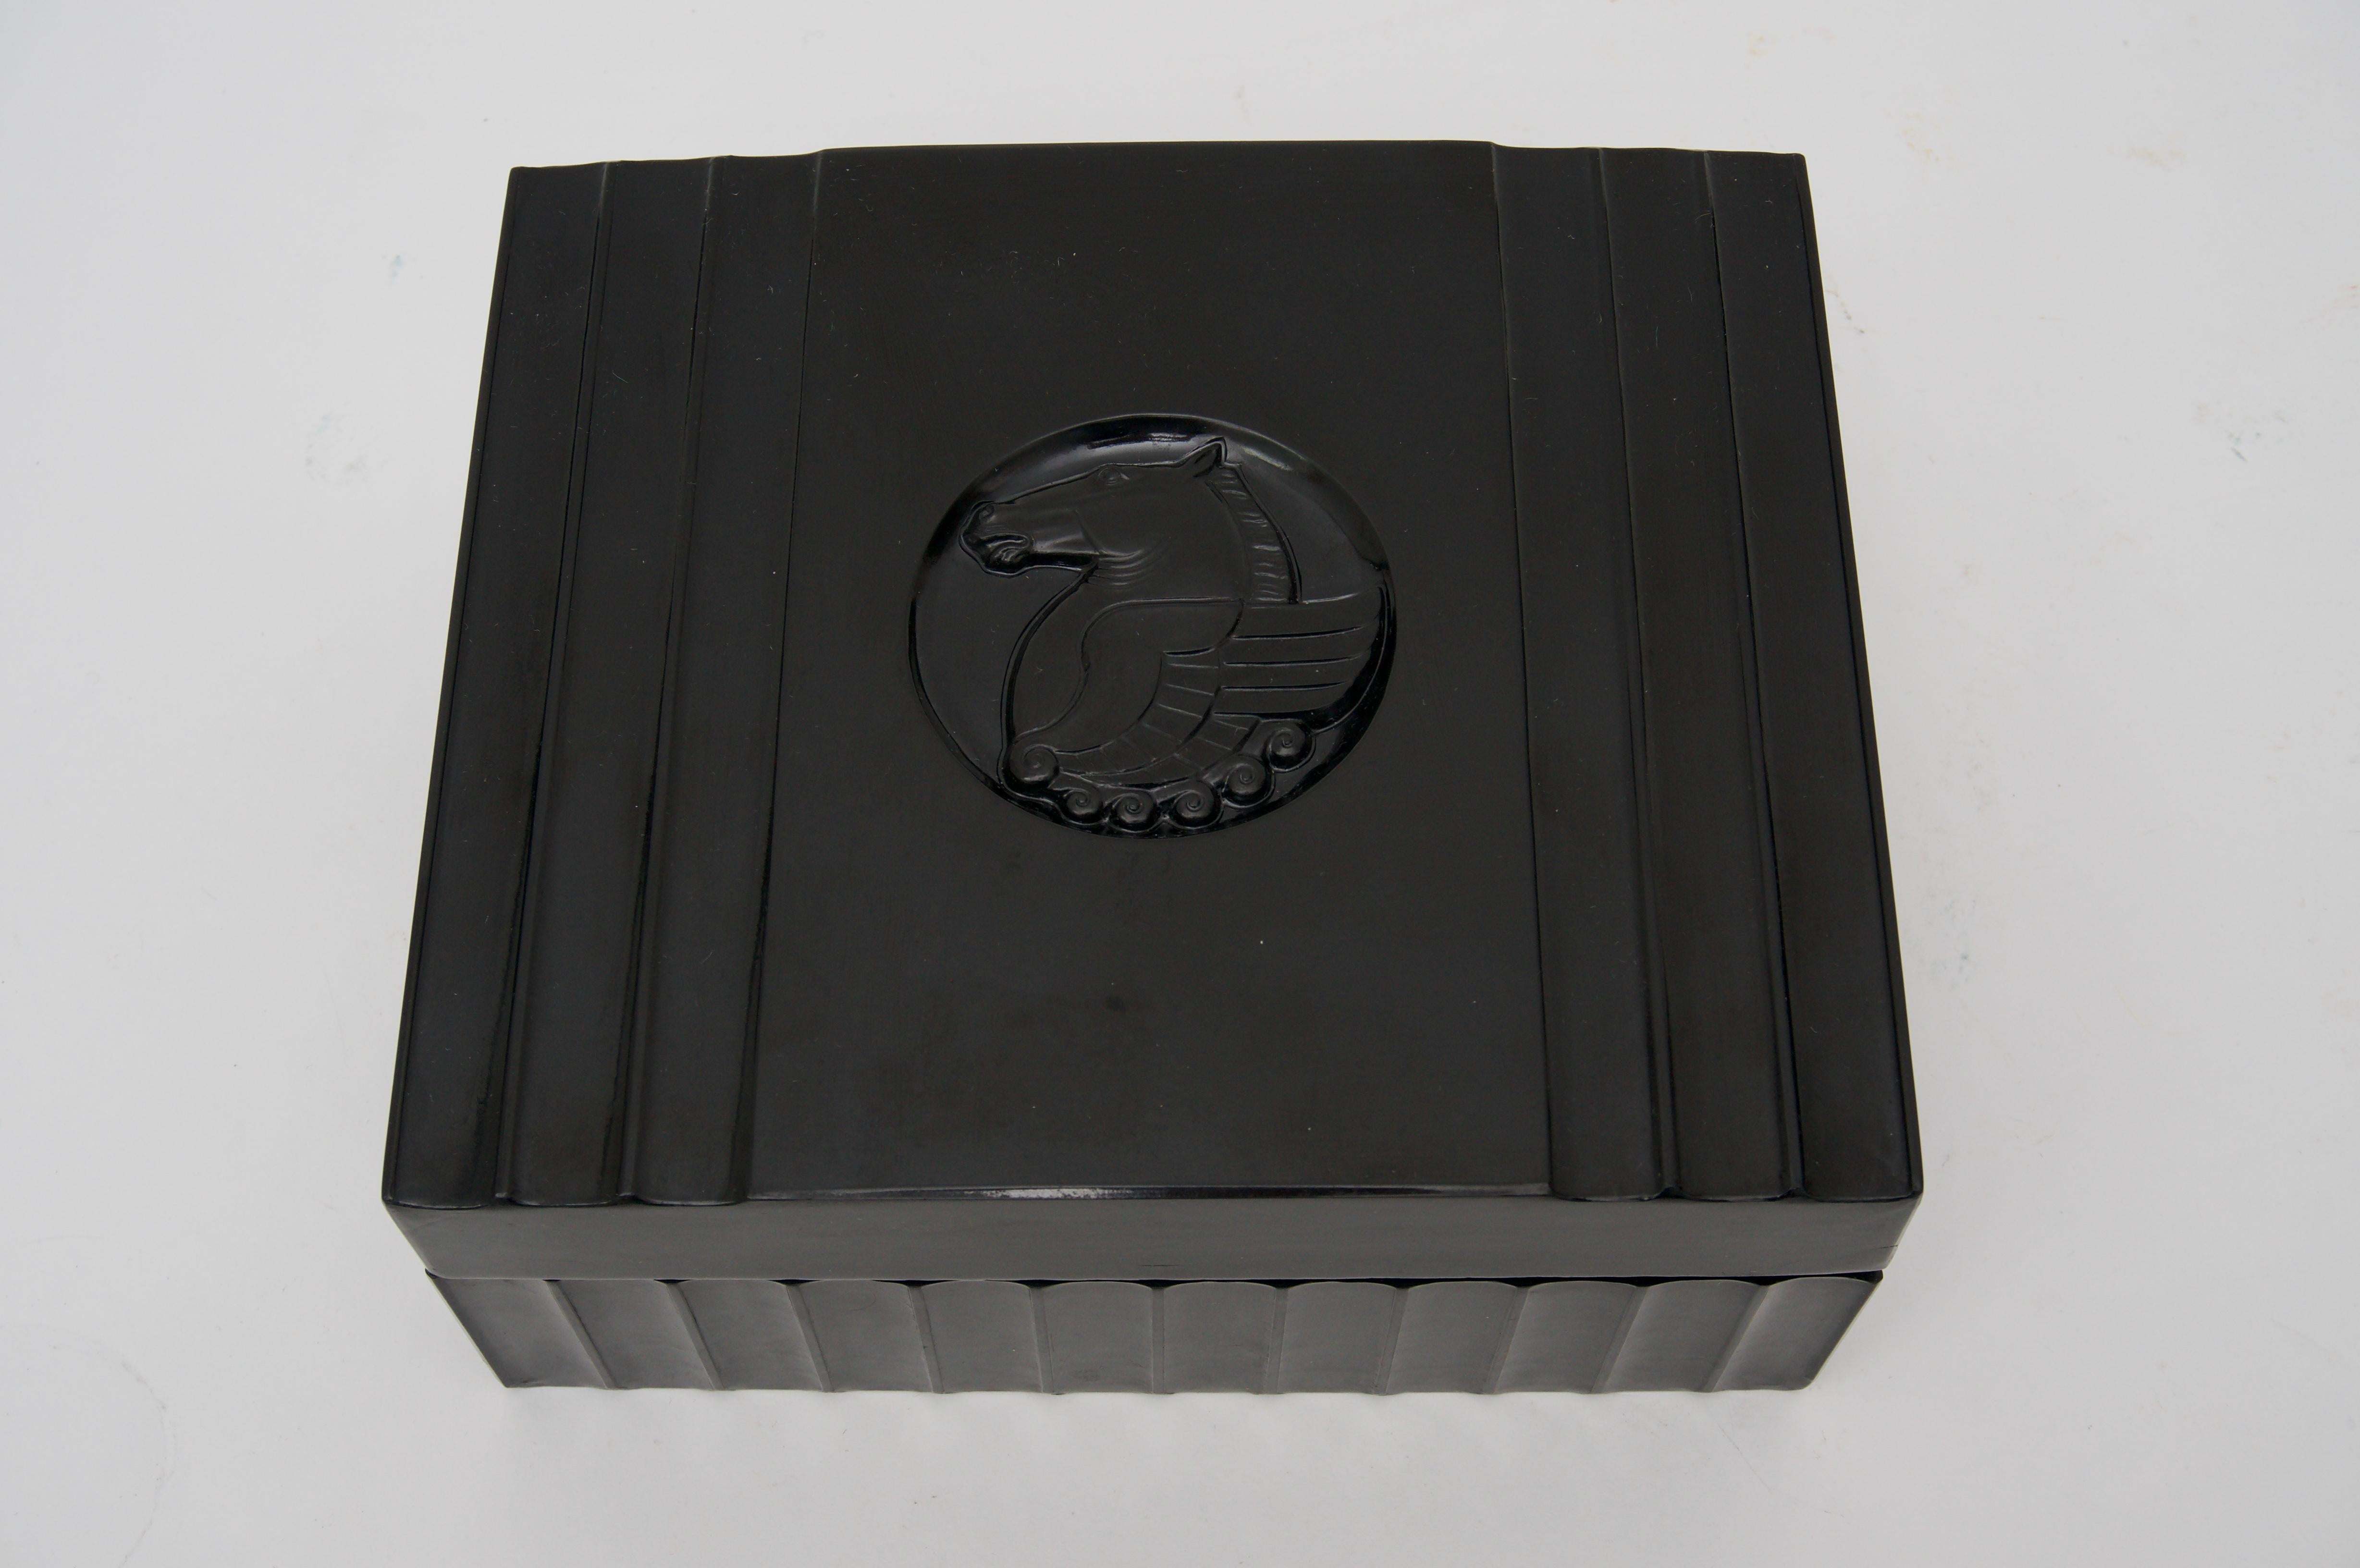 This stylish large-scale American Art Deco bakelite box dates to the late 1920s to the early 1930s. The piece is detailed with convex fluted sides and lid with a central medallion of Pegasus.

FYI
Usually depicted as pure white, Pegasus is a